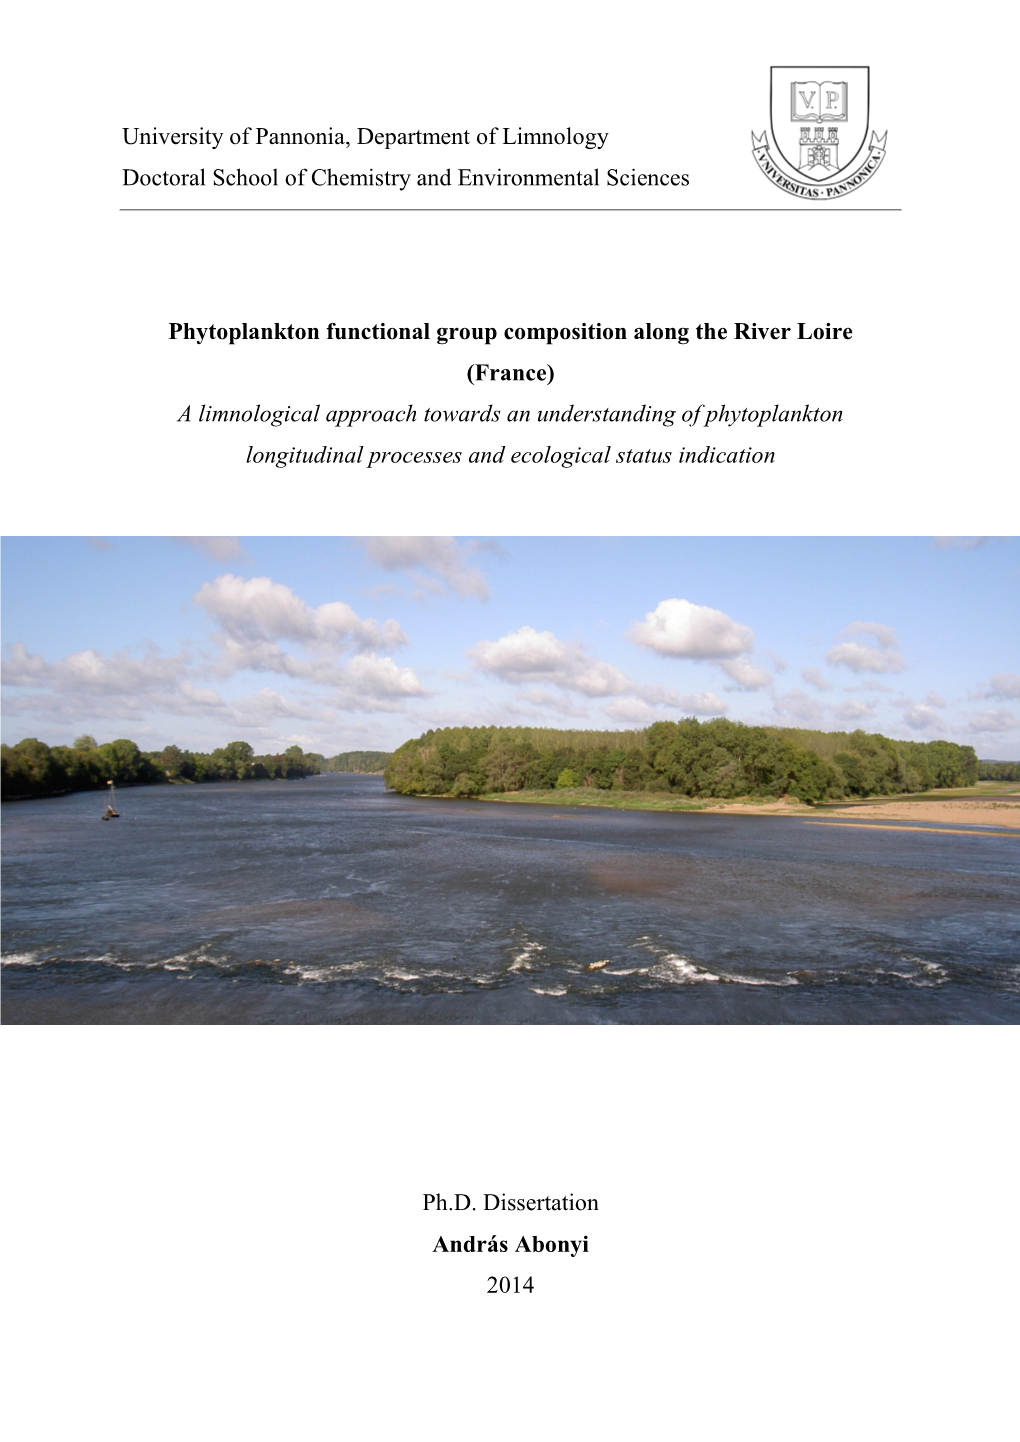 University of Pannonia, Department of Limnology Doctoral School of Chemistry and Environmental Sciences Phytoplankton Functional